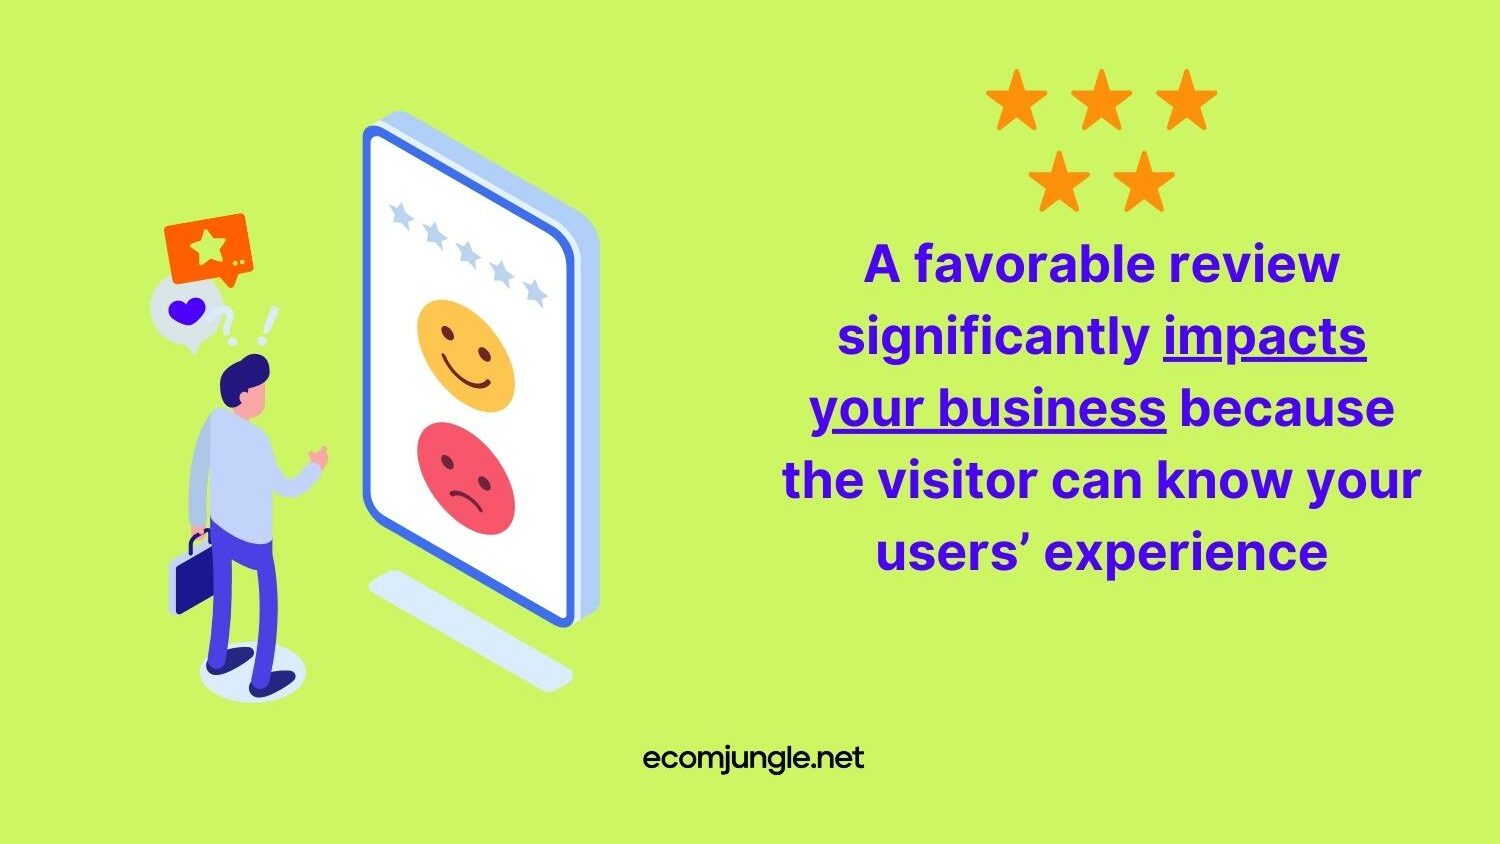 Customer reviews may help and destroy your business, but it is way how to promote it.